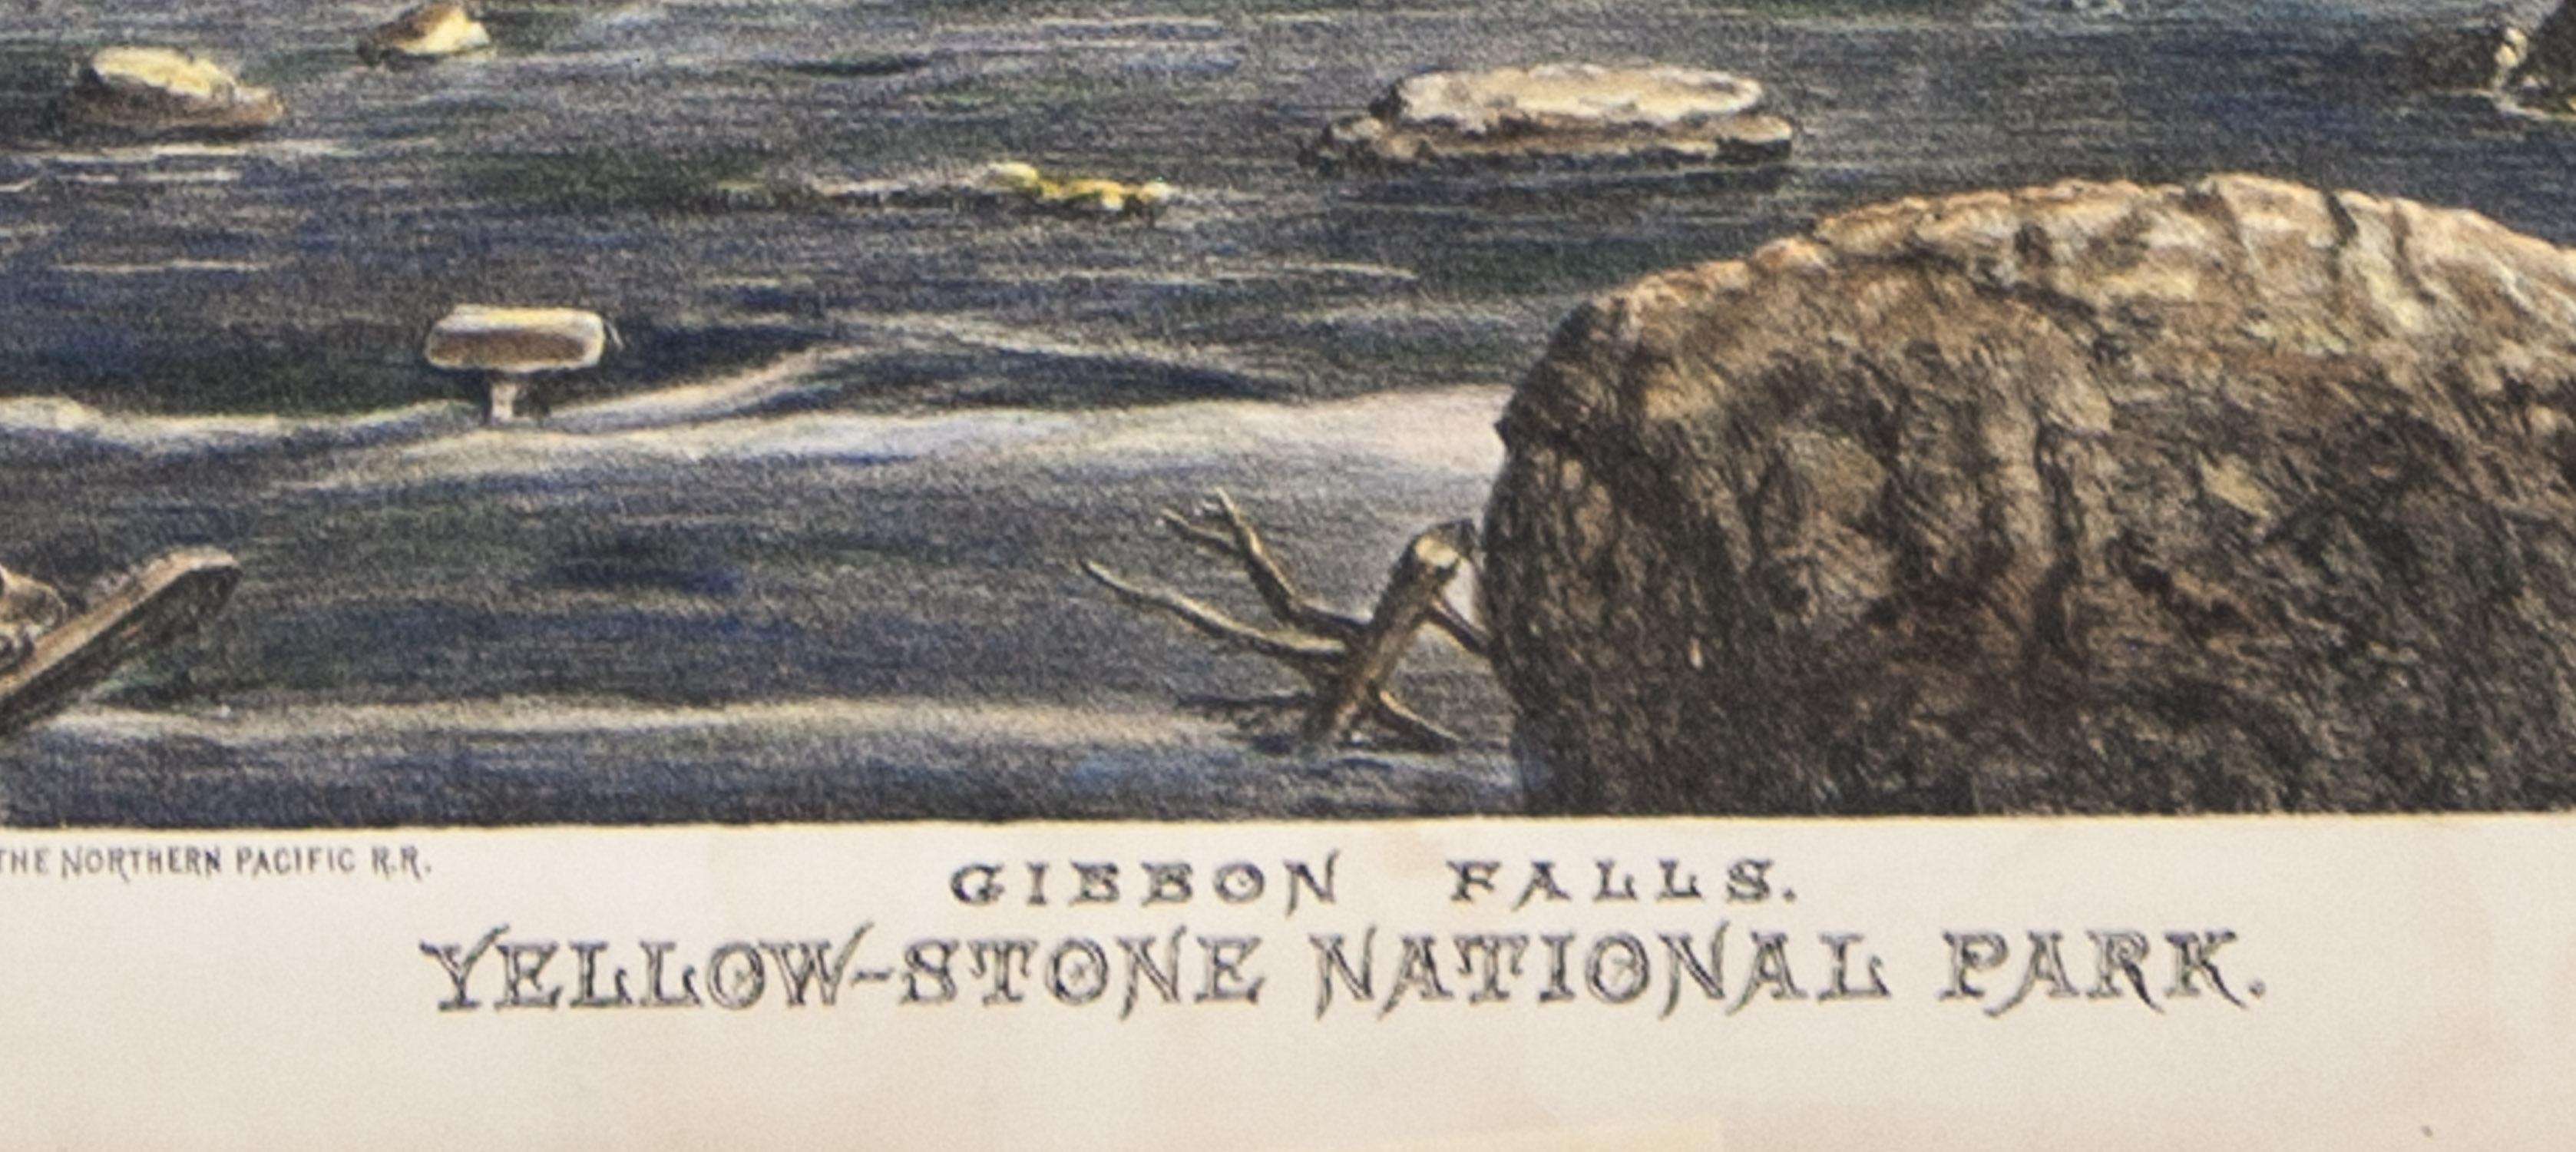 Gibbon Falls, Yellow-Stone National Park  is a chromolithograph from c.1880 showing two fisherman at the base of Gibbon Falls.  This chromolithograph is a dramatic view of the powerful Gibbon waterfall that cascades 84 feet into a small, clear pool.